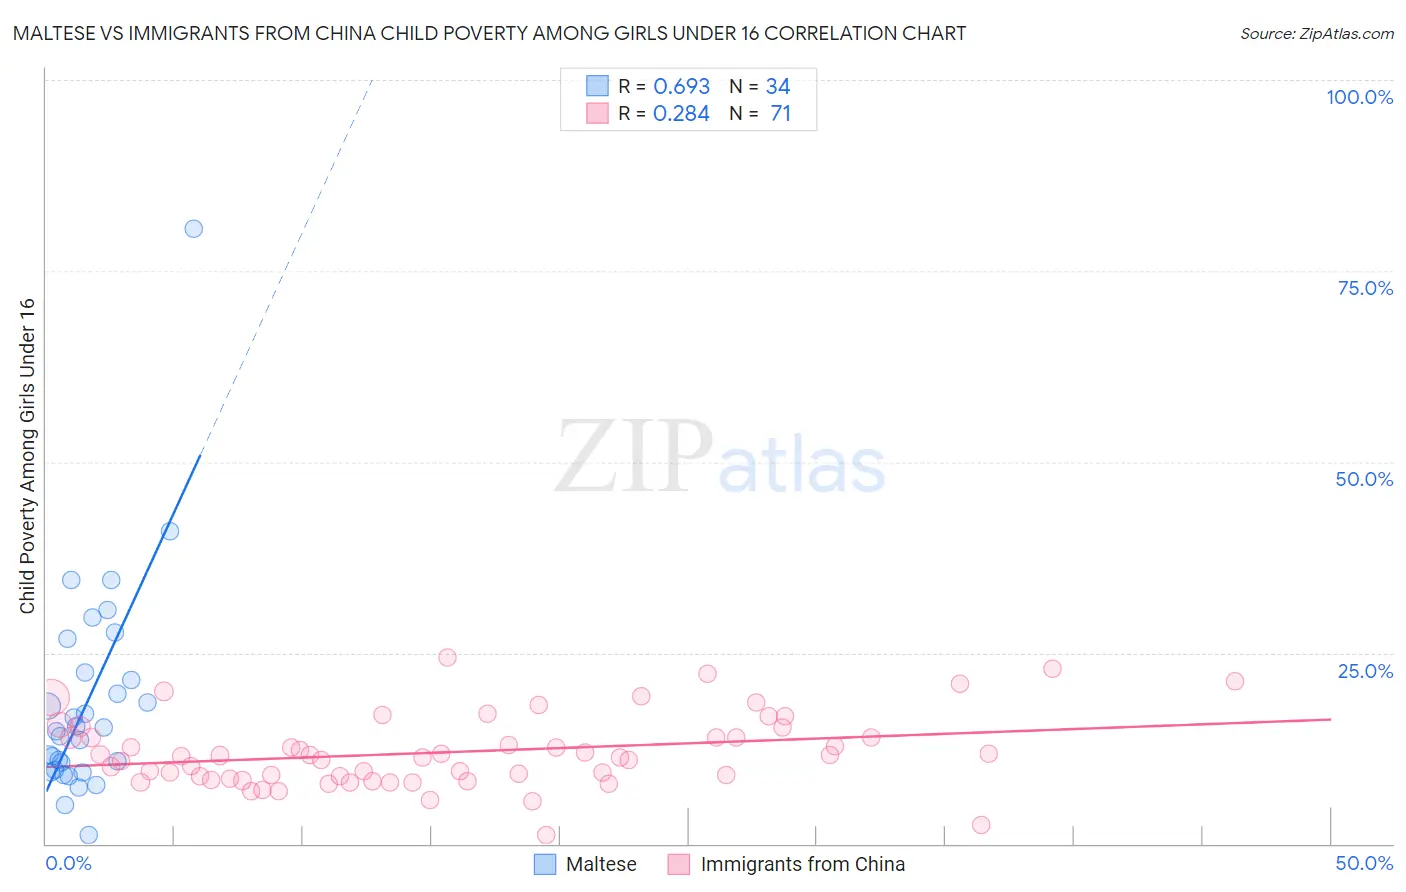 Maltese vs Immigrants from China Child Poverty Among Girls Under 16